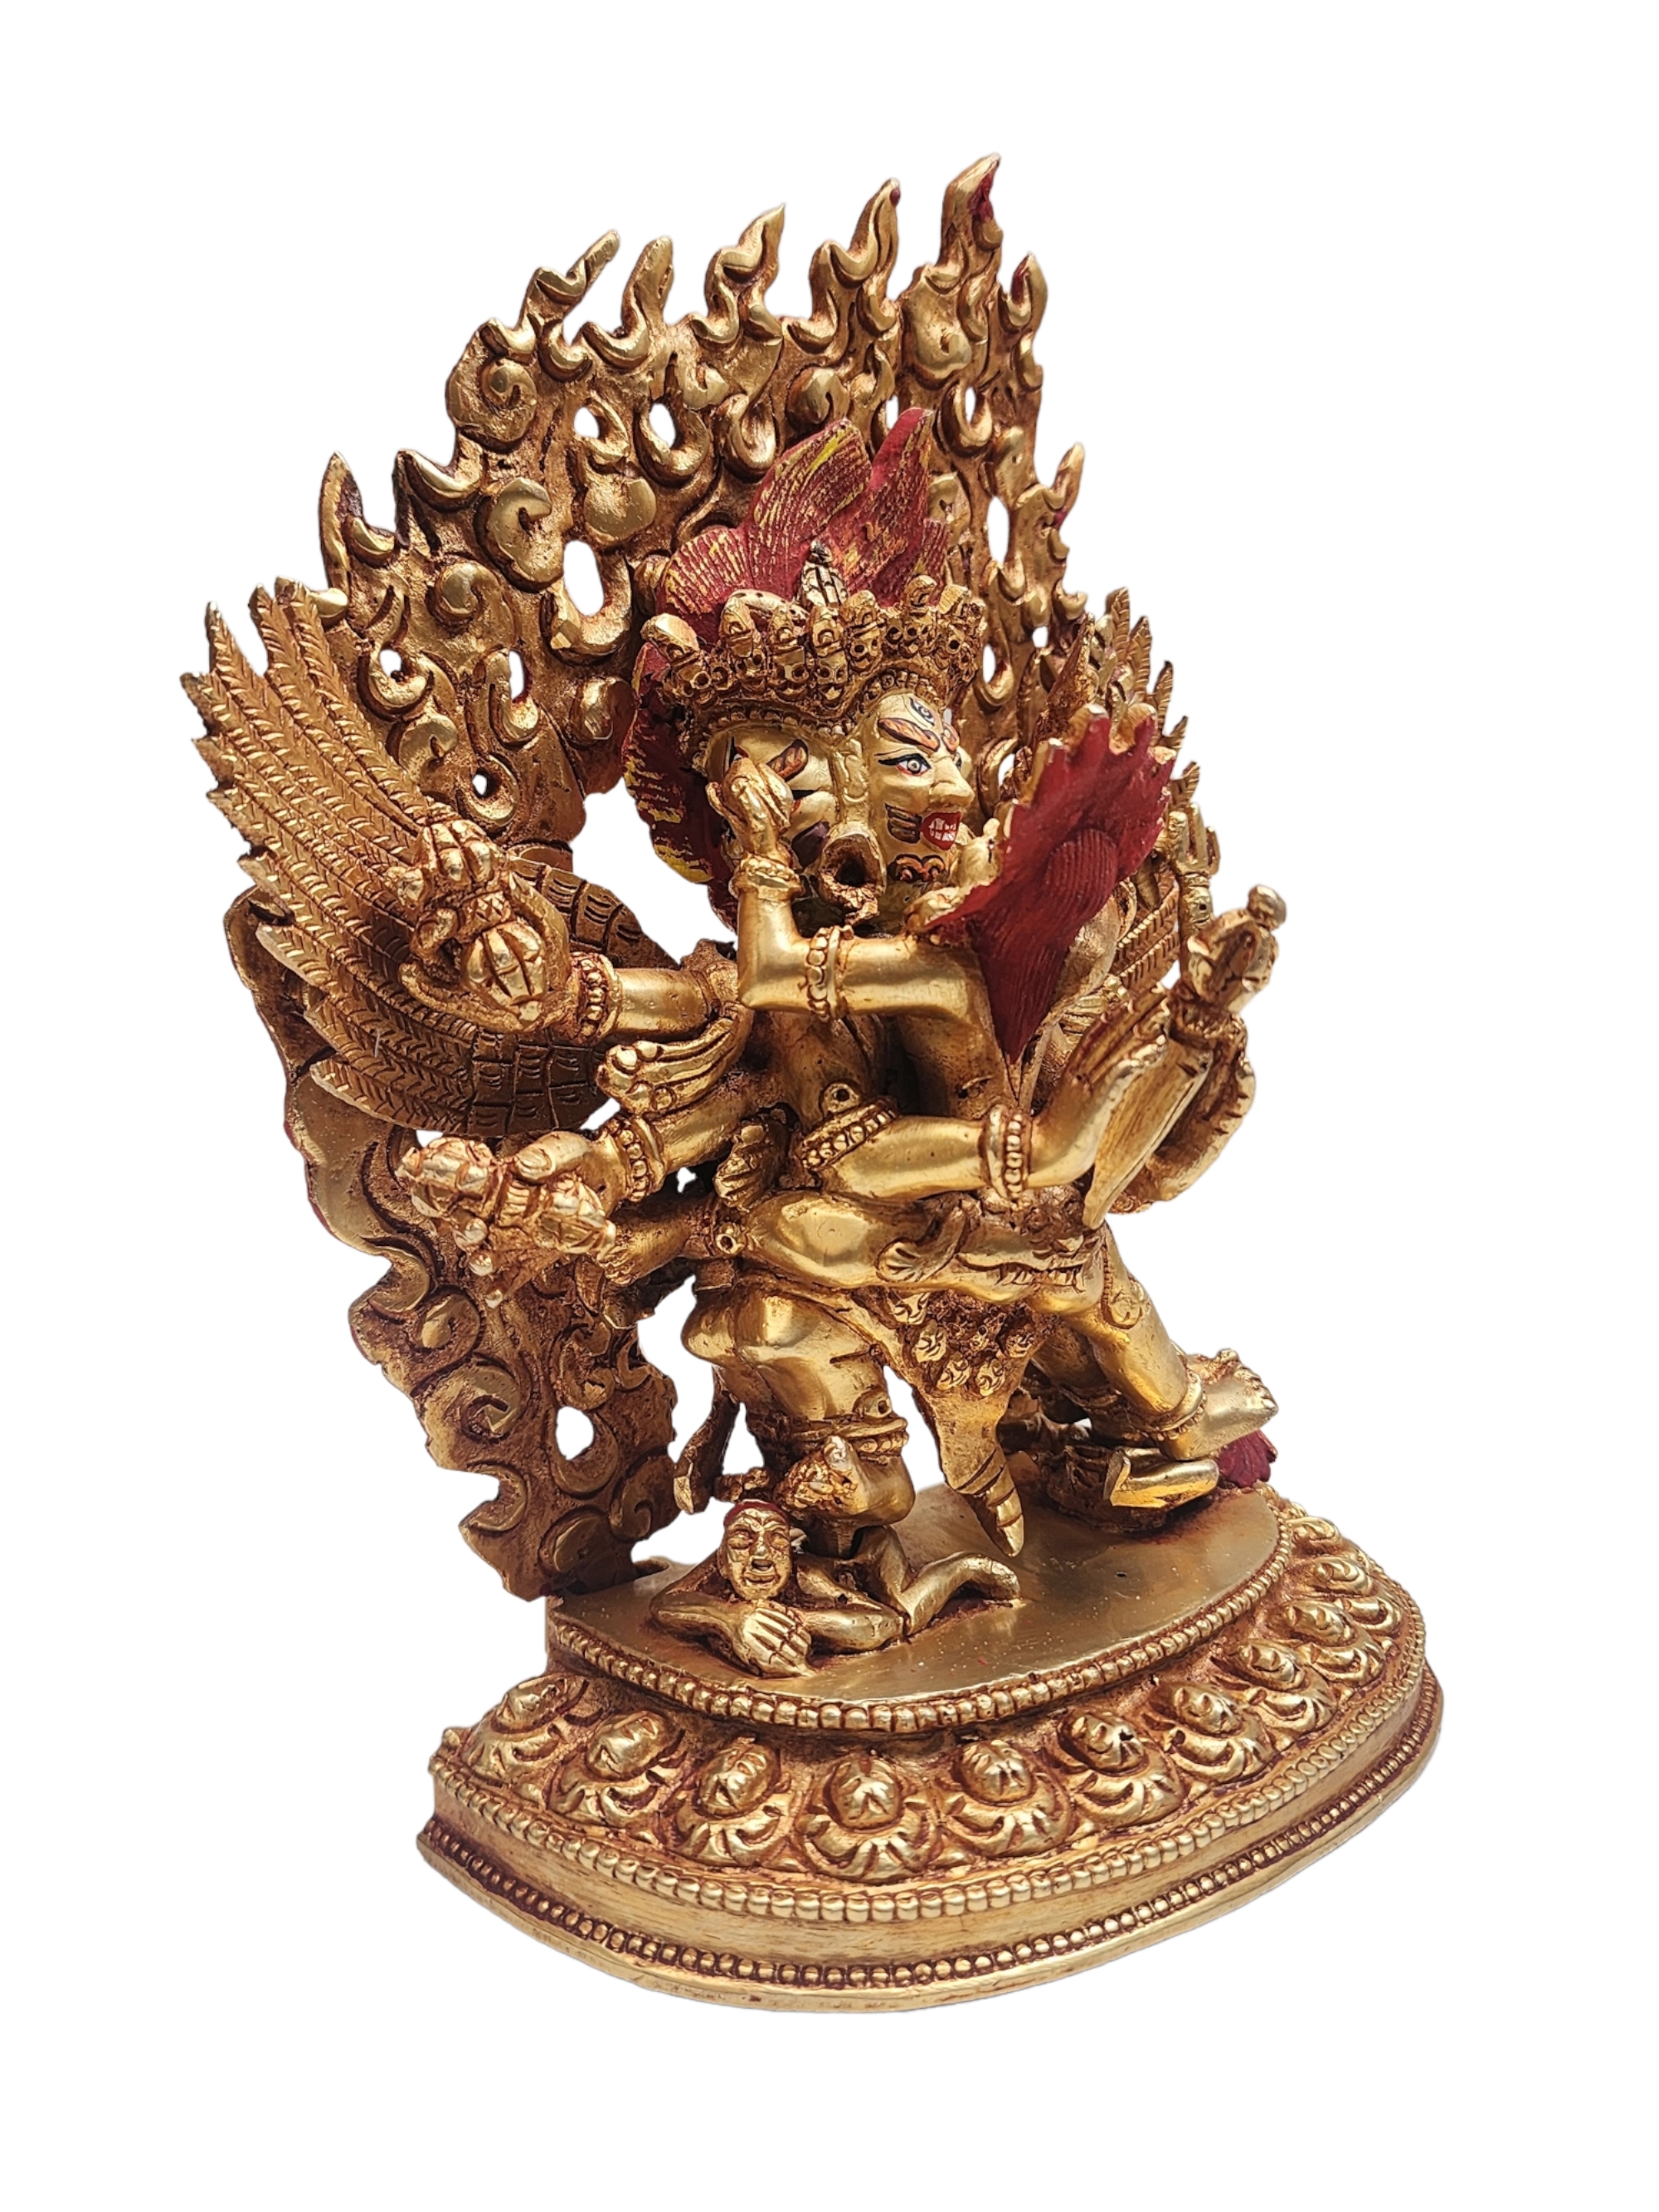 Buddhist Statue Of vajrakilaya - Dorje Phurba, With Full Gold Plated And Painted Face